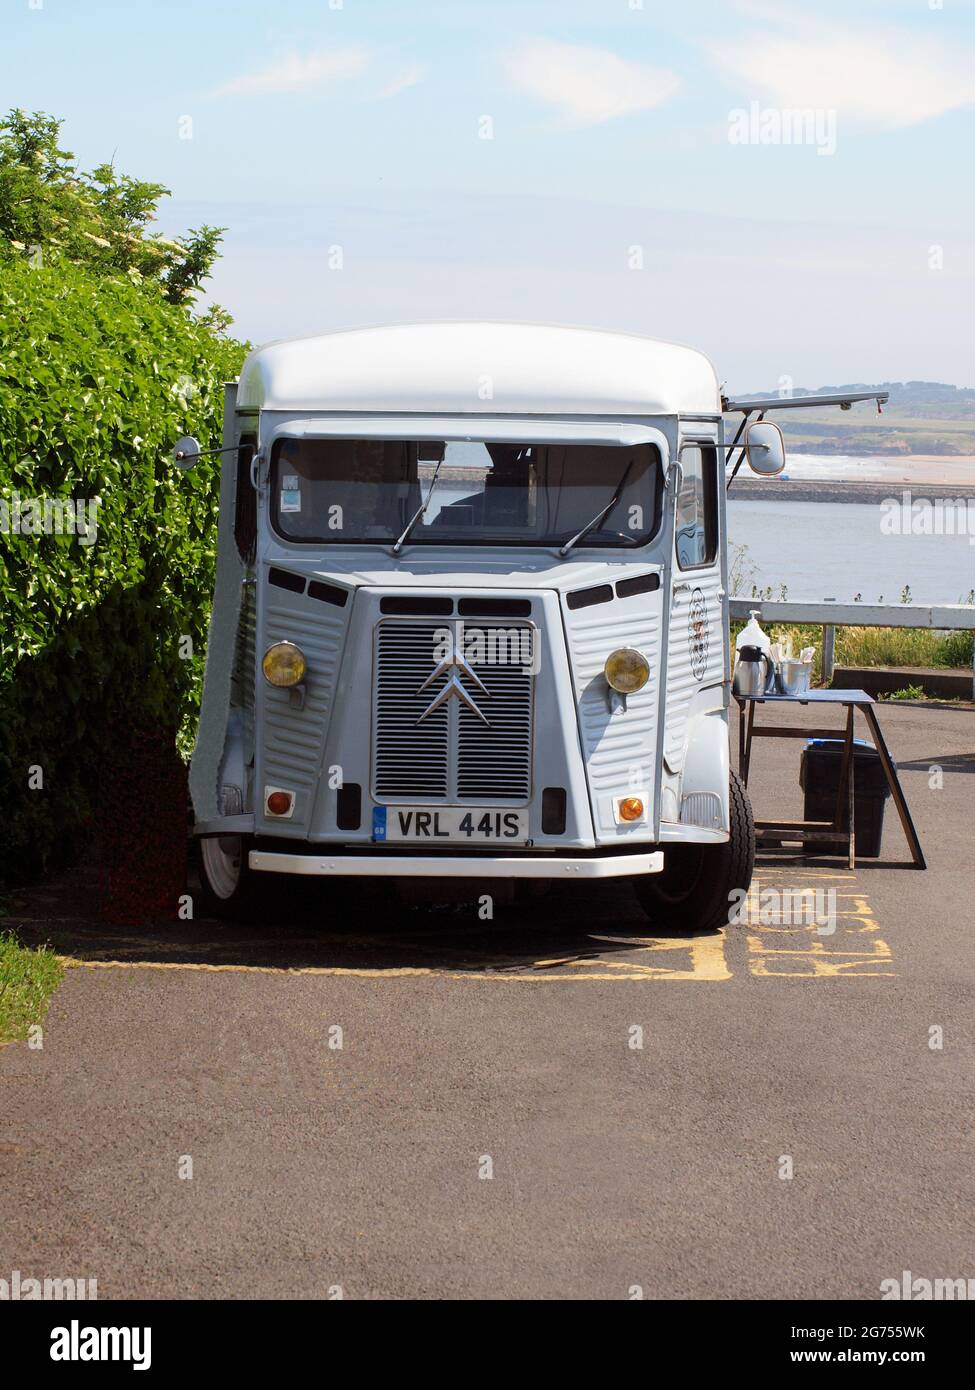 A vintage Citroen H.Y. four door pane light commercial van selling hot and cold food beverages at a Tynemouth seaside location in the UK. Stock Photo